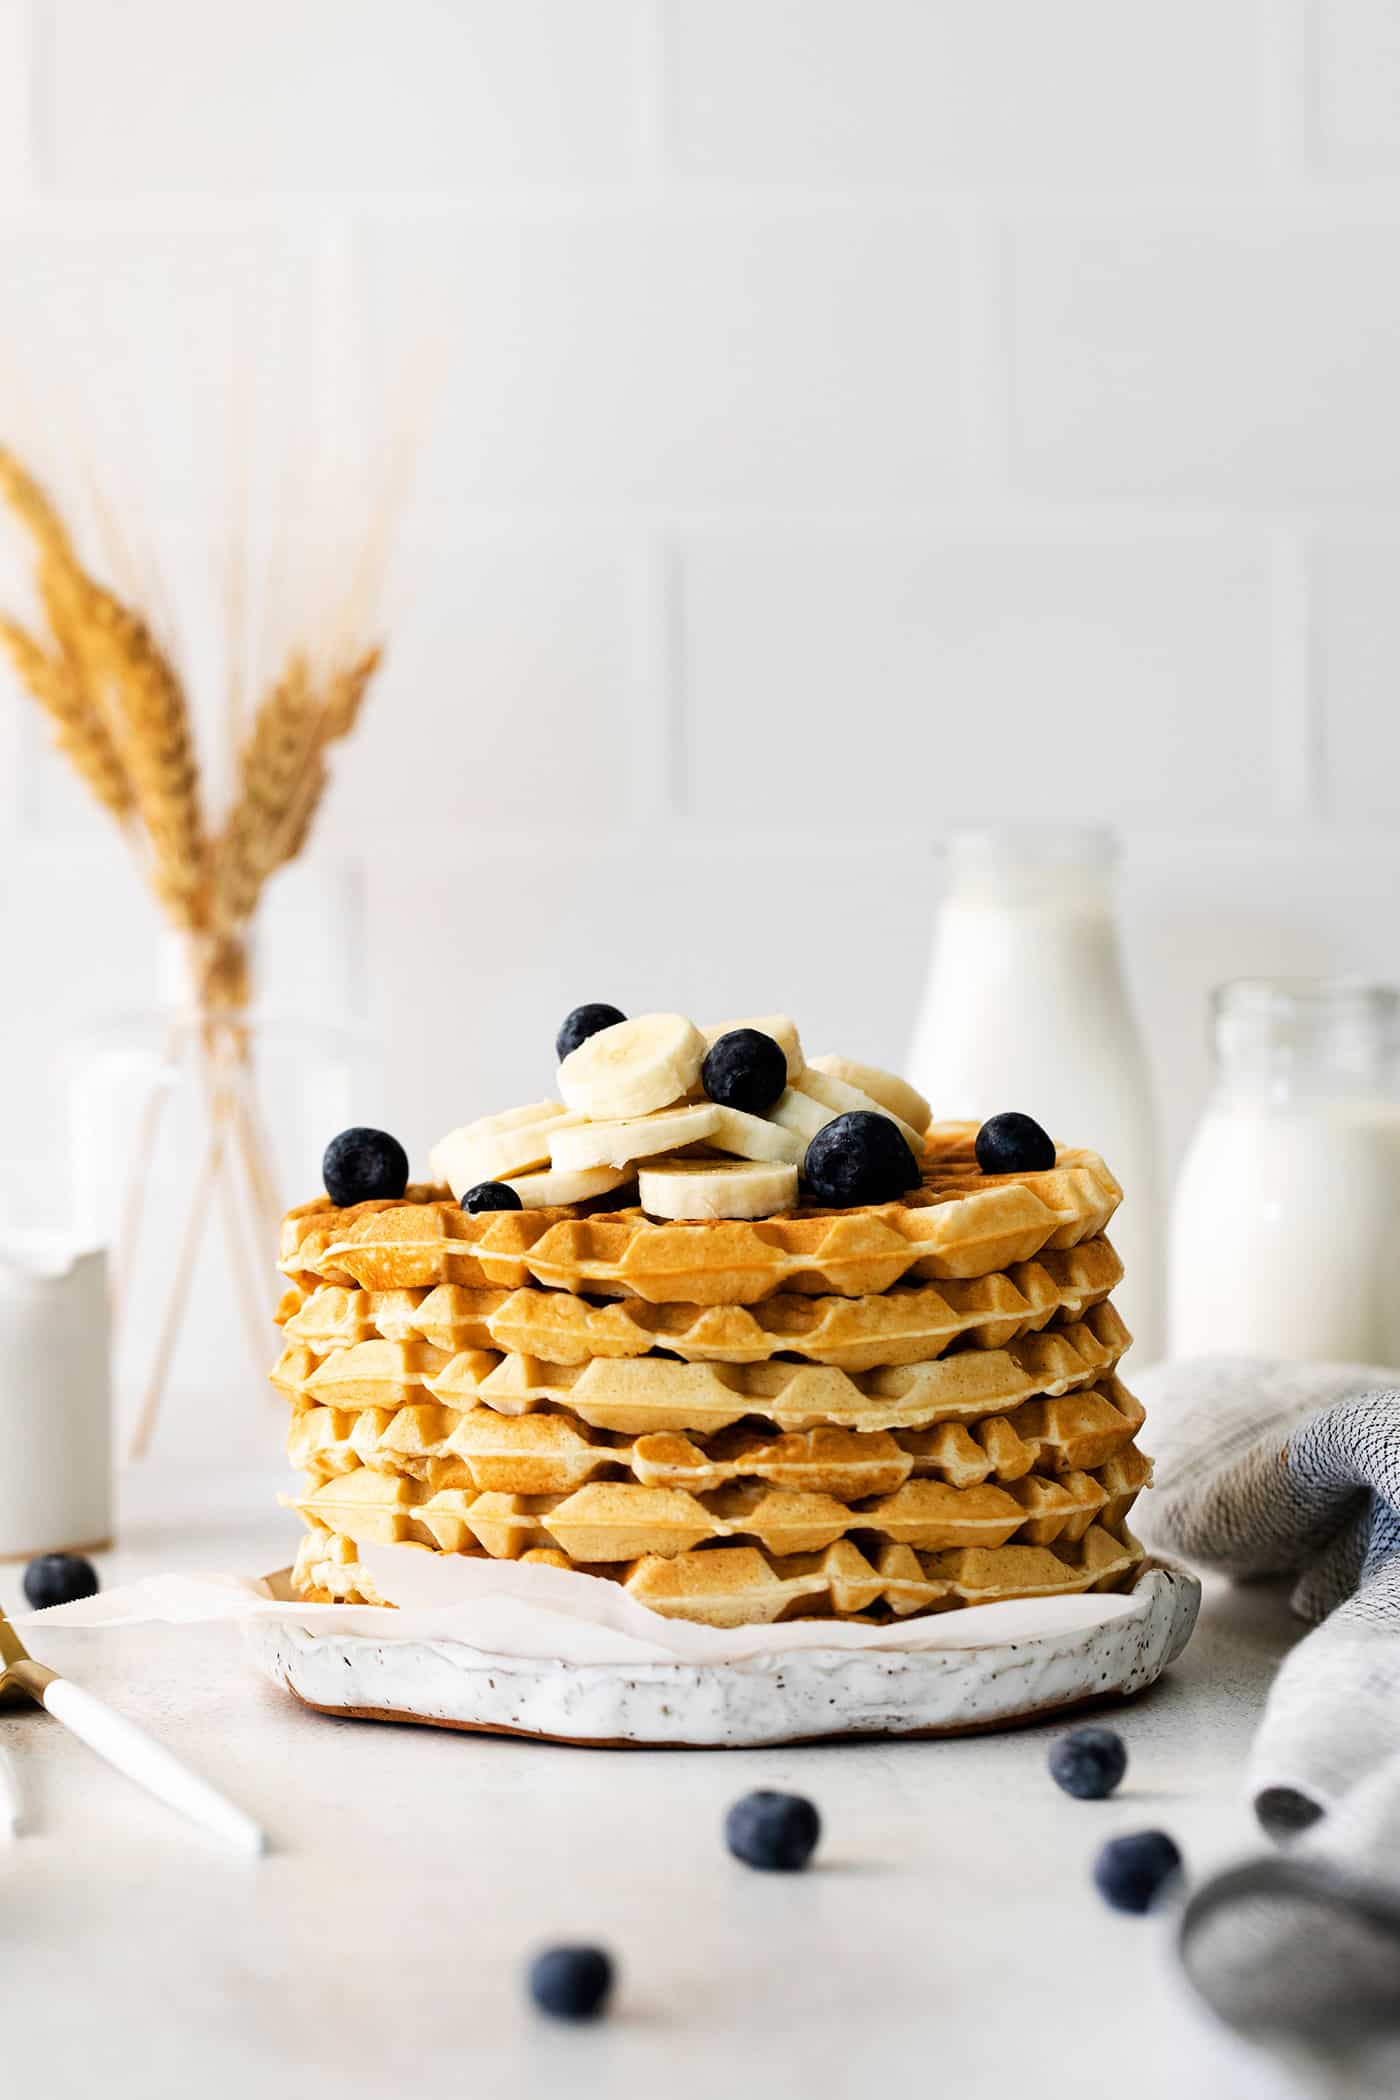 A stack of classic waffles with blueberries and bananas on a white plate